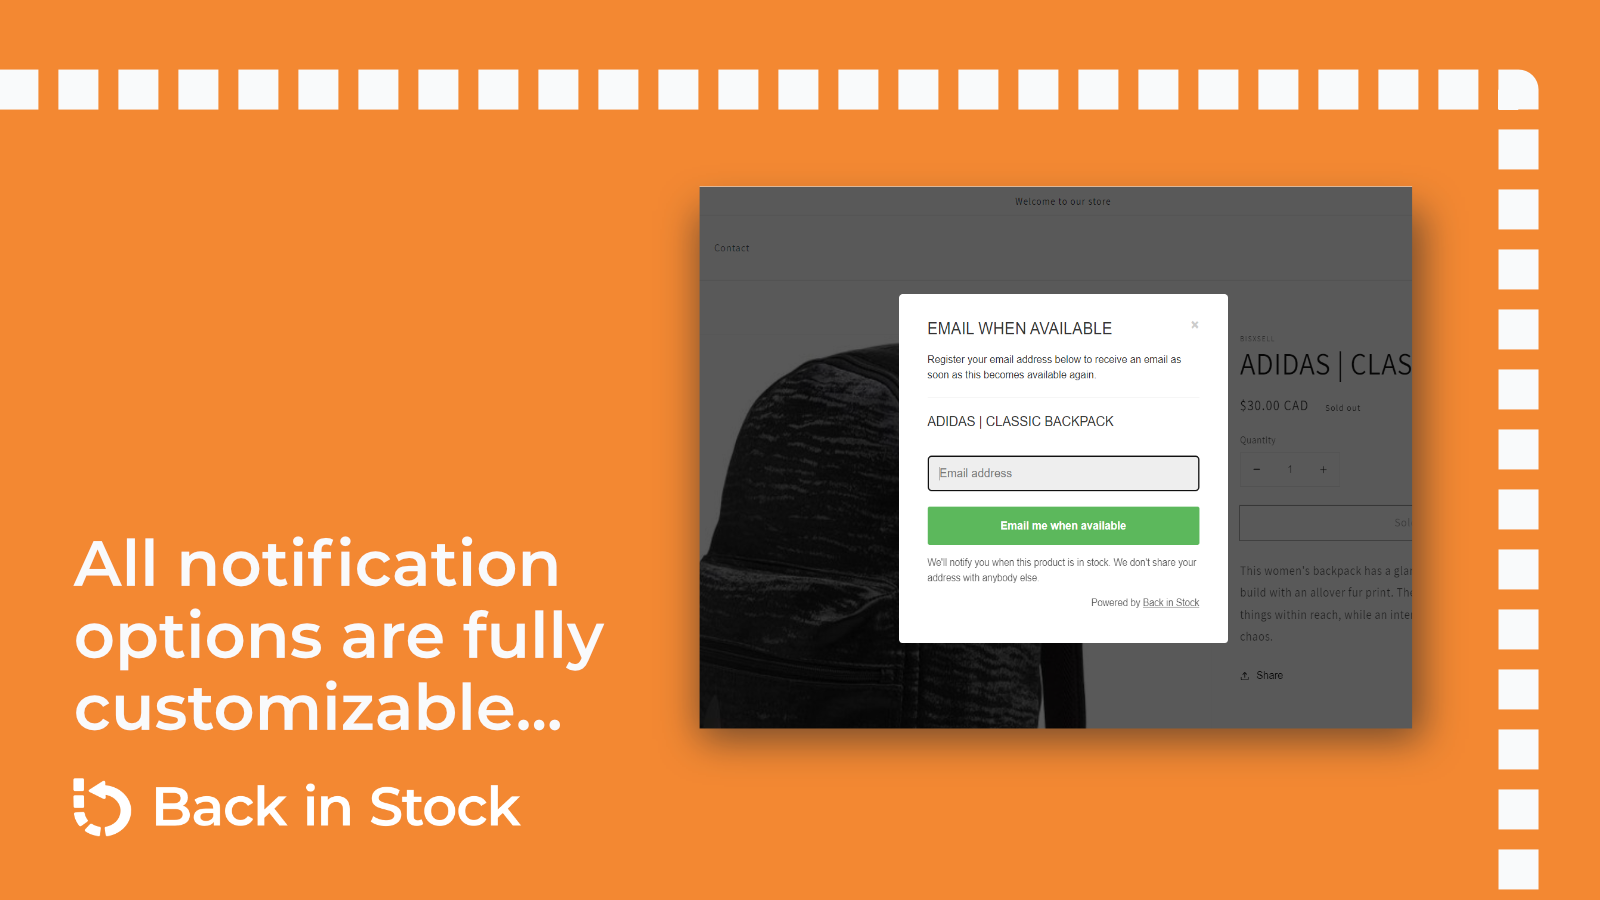 All Back in Stock Notification texts are fully customizable.